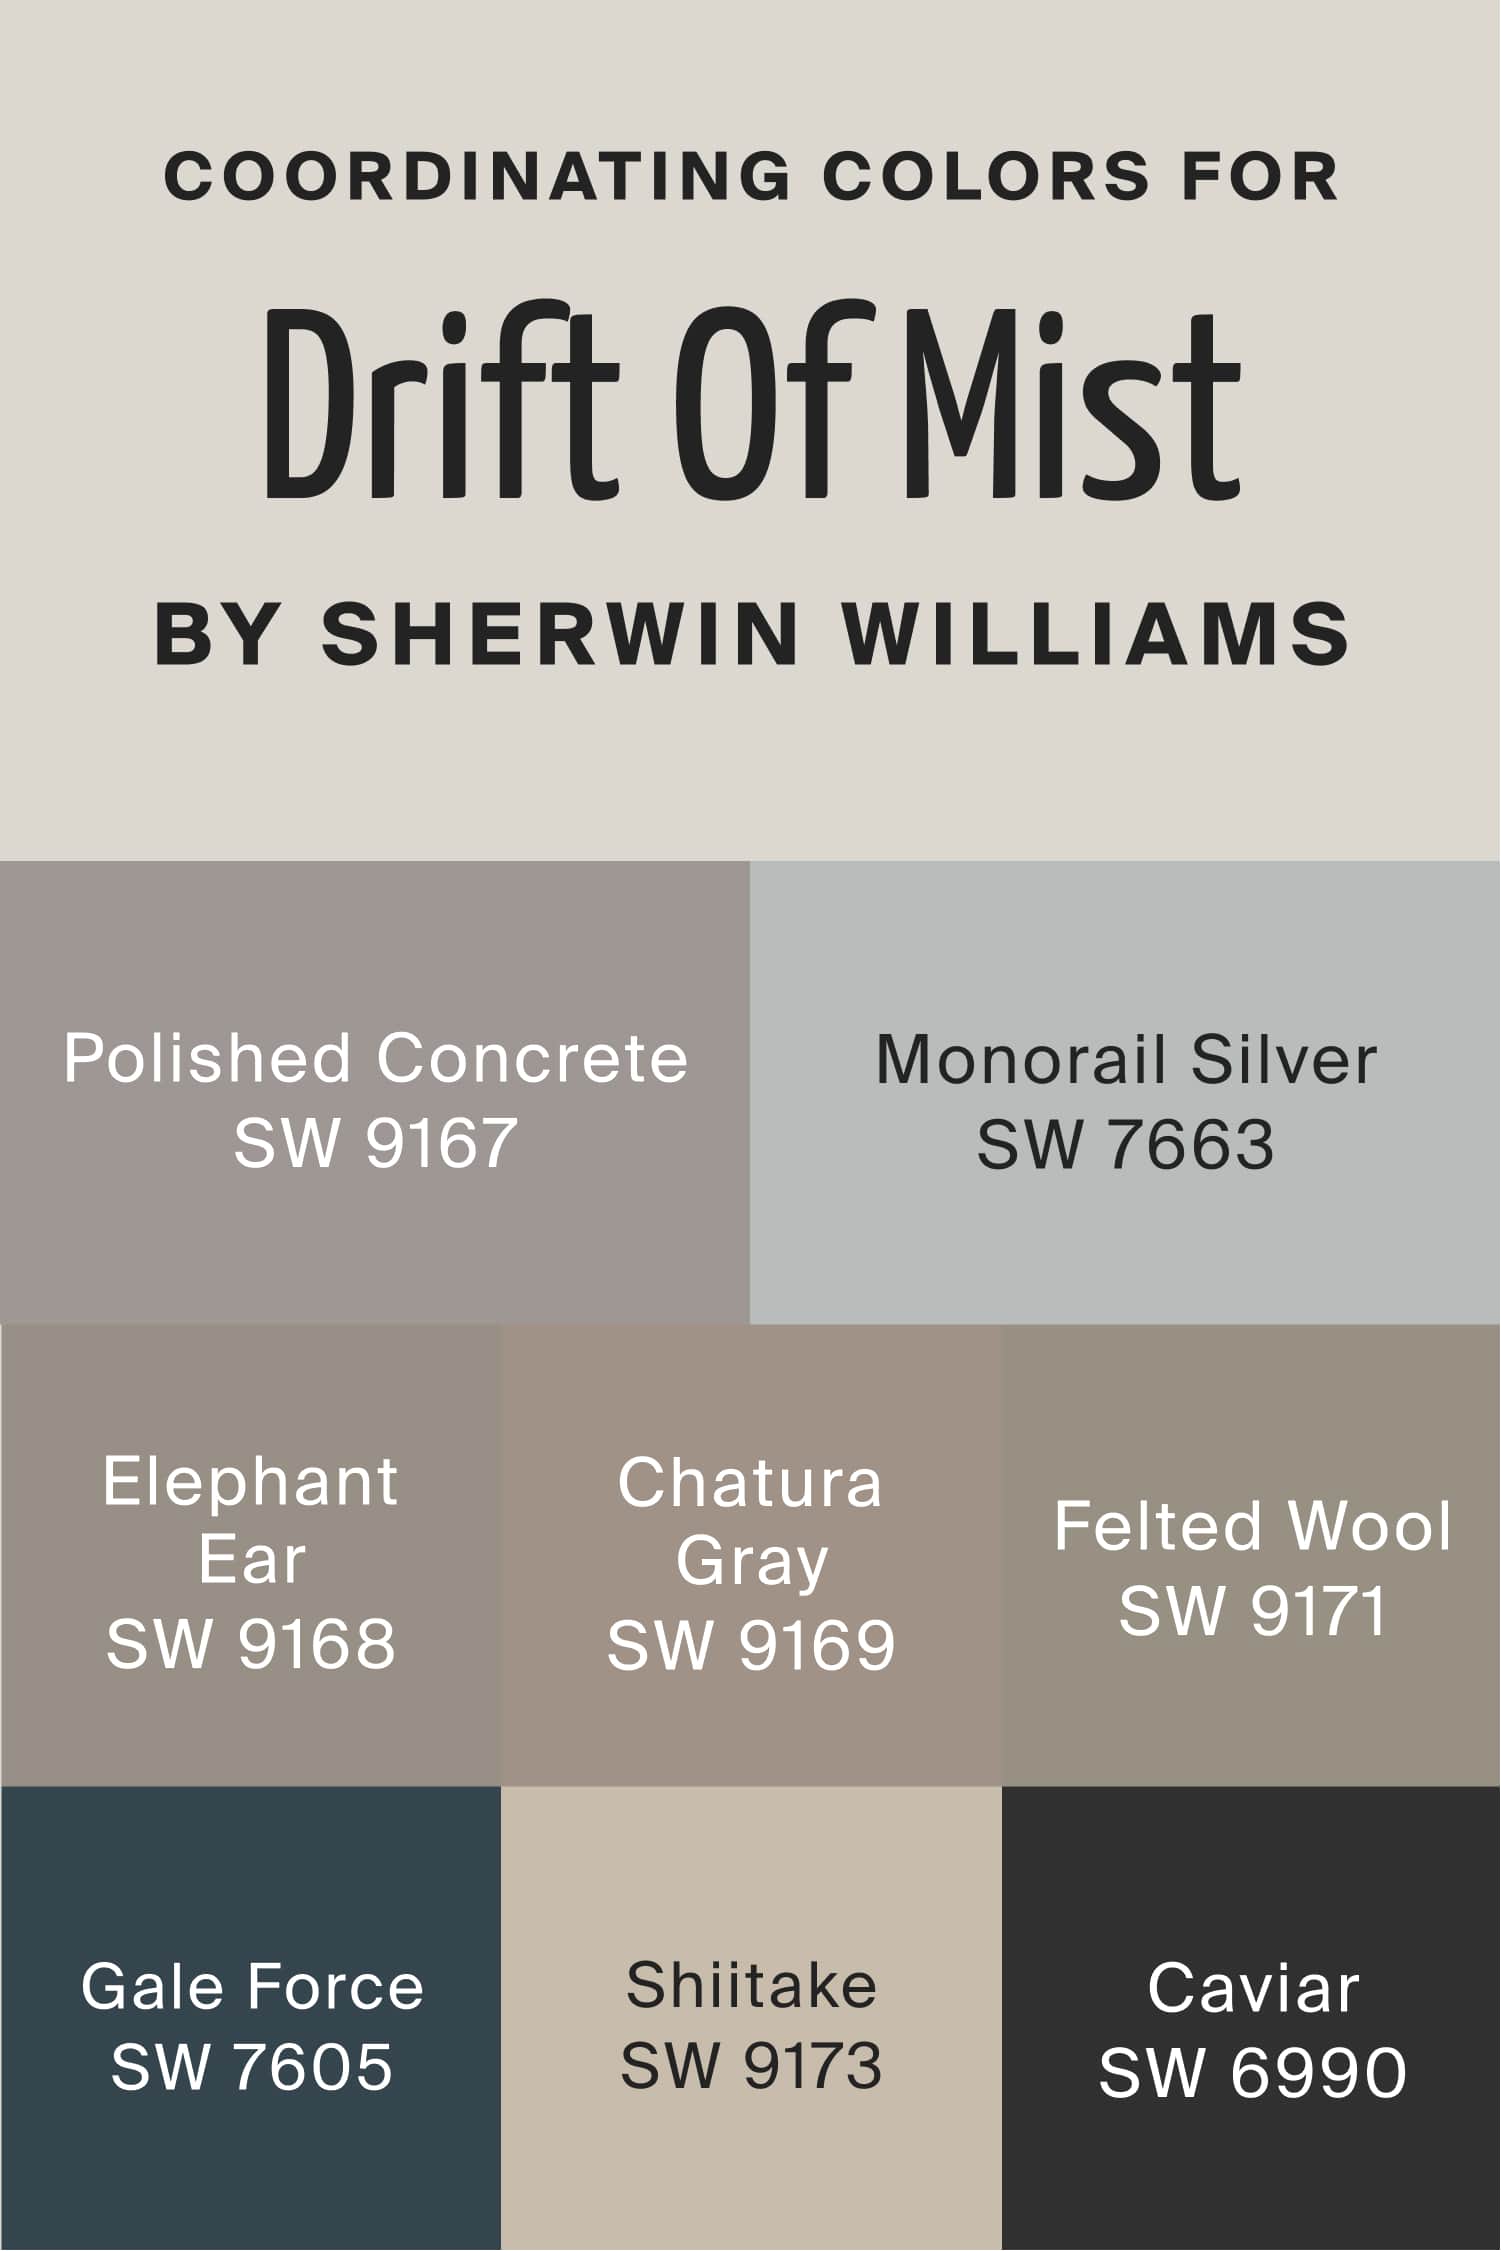 Coordinating Colors for Drift Of Mist by Sherwin Williams